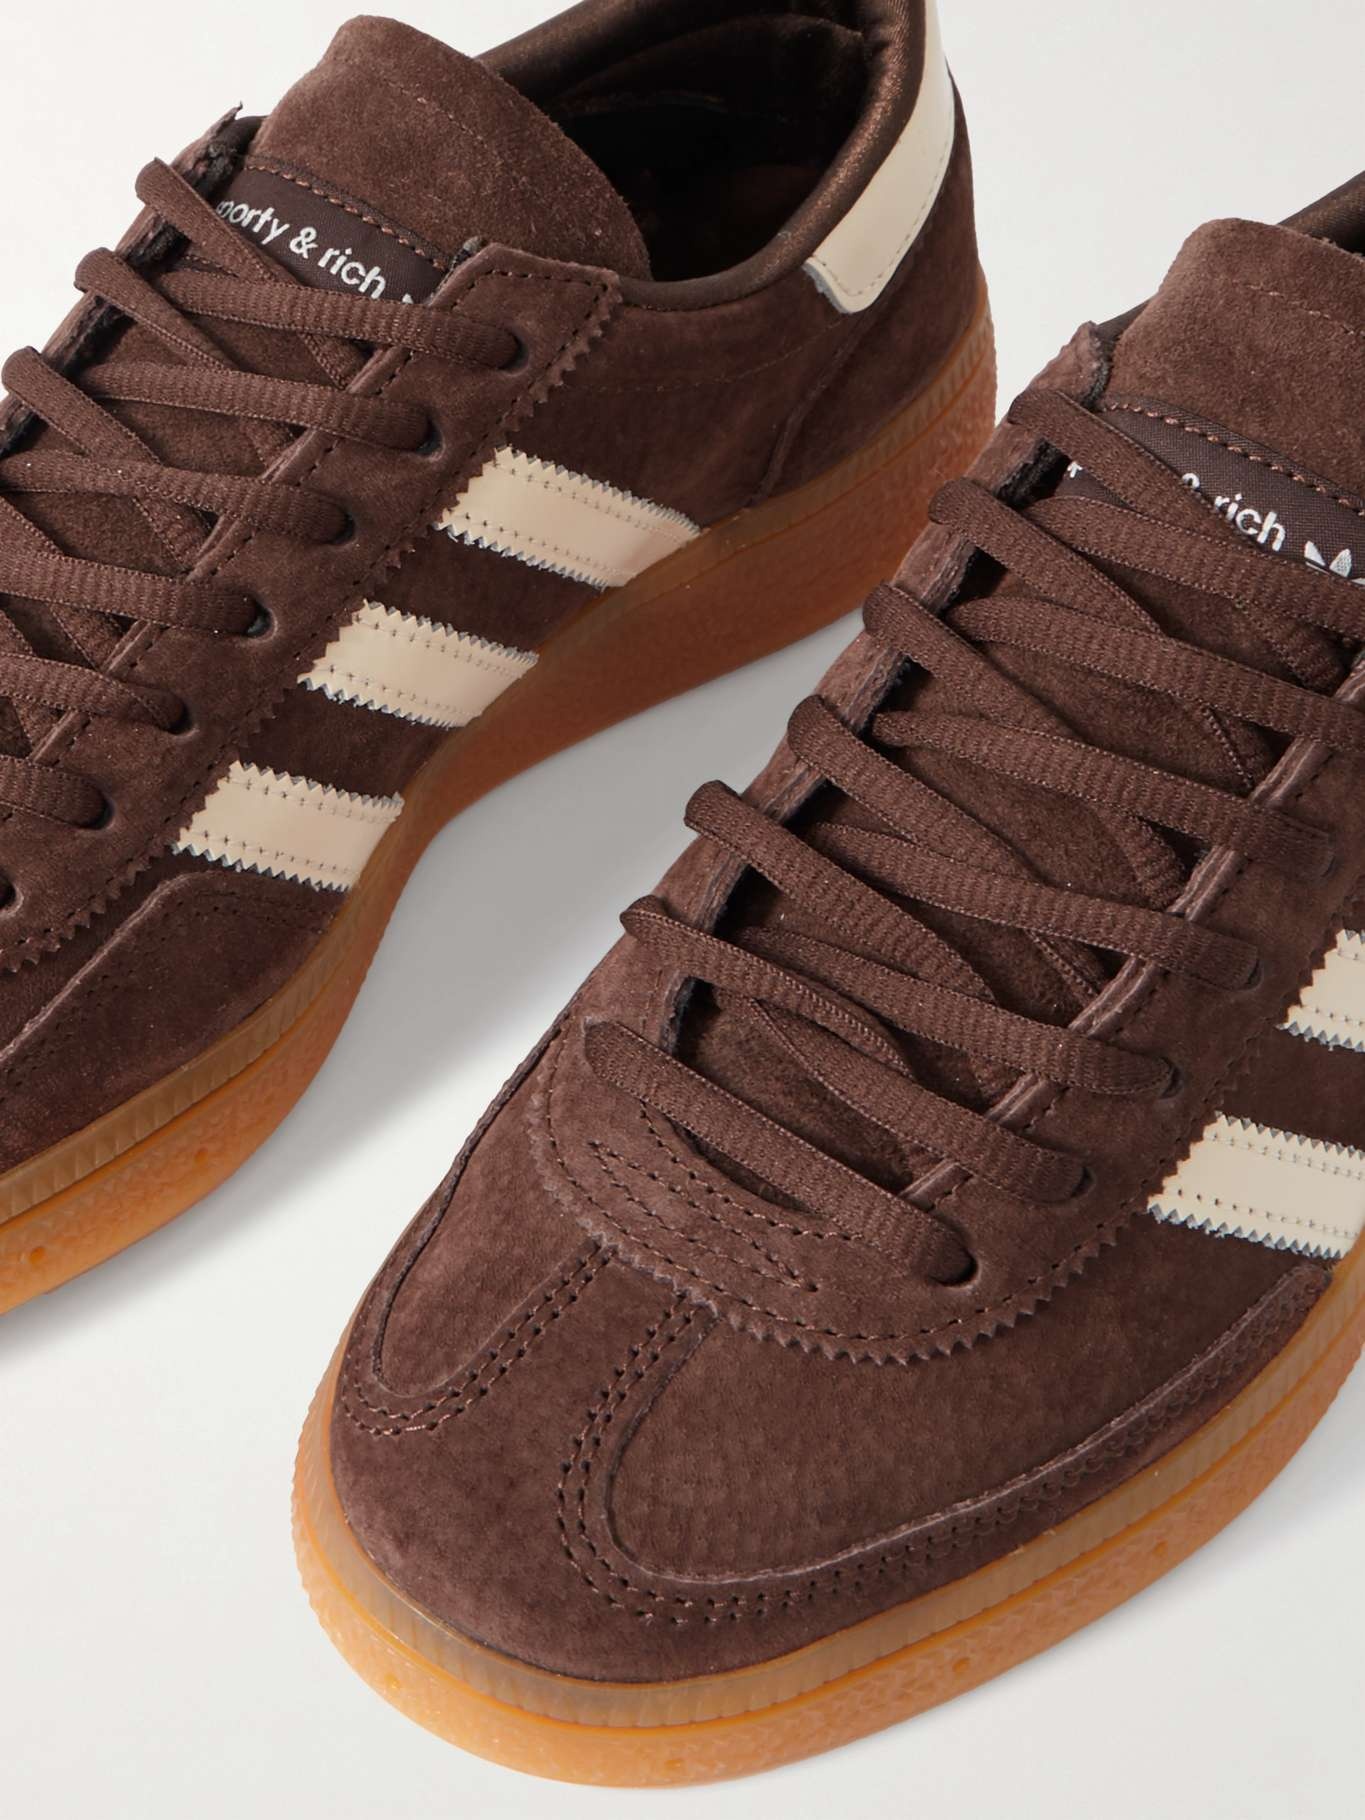 + Sporty & Rich Handball Spezial leather-trimmed suede sneakers - 4